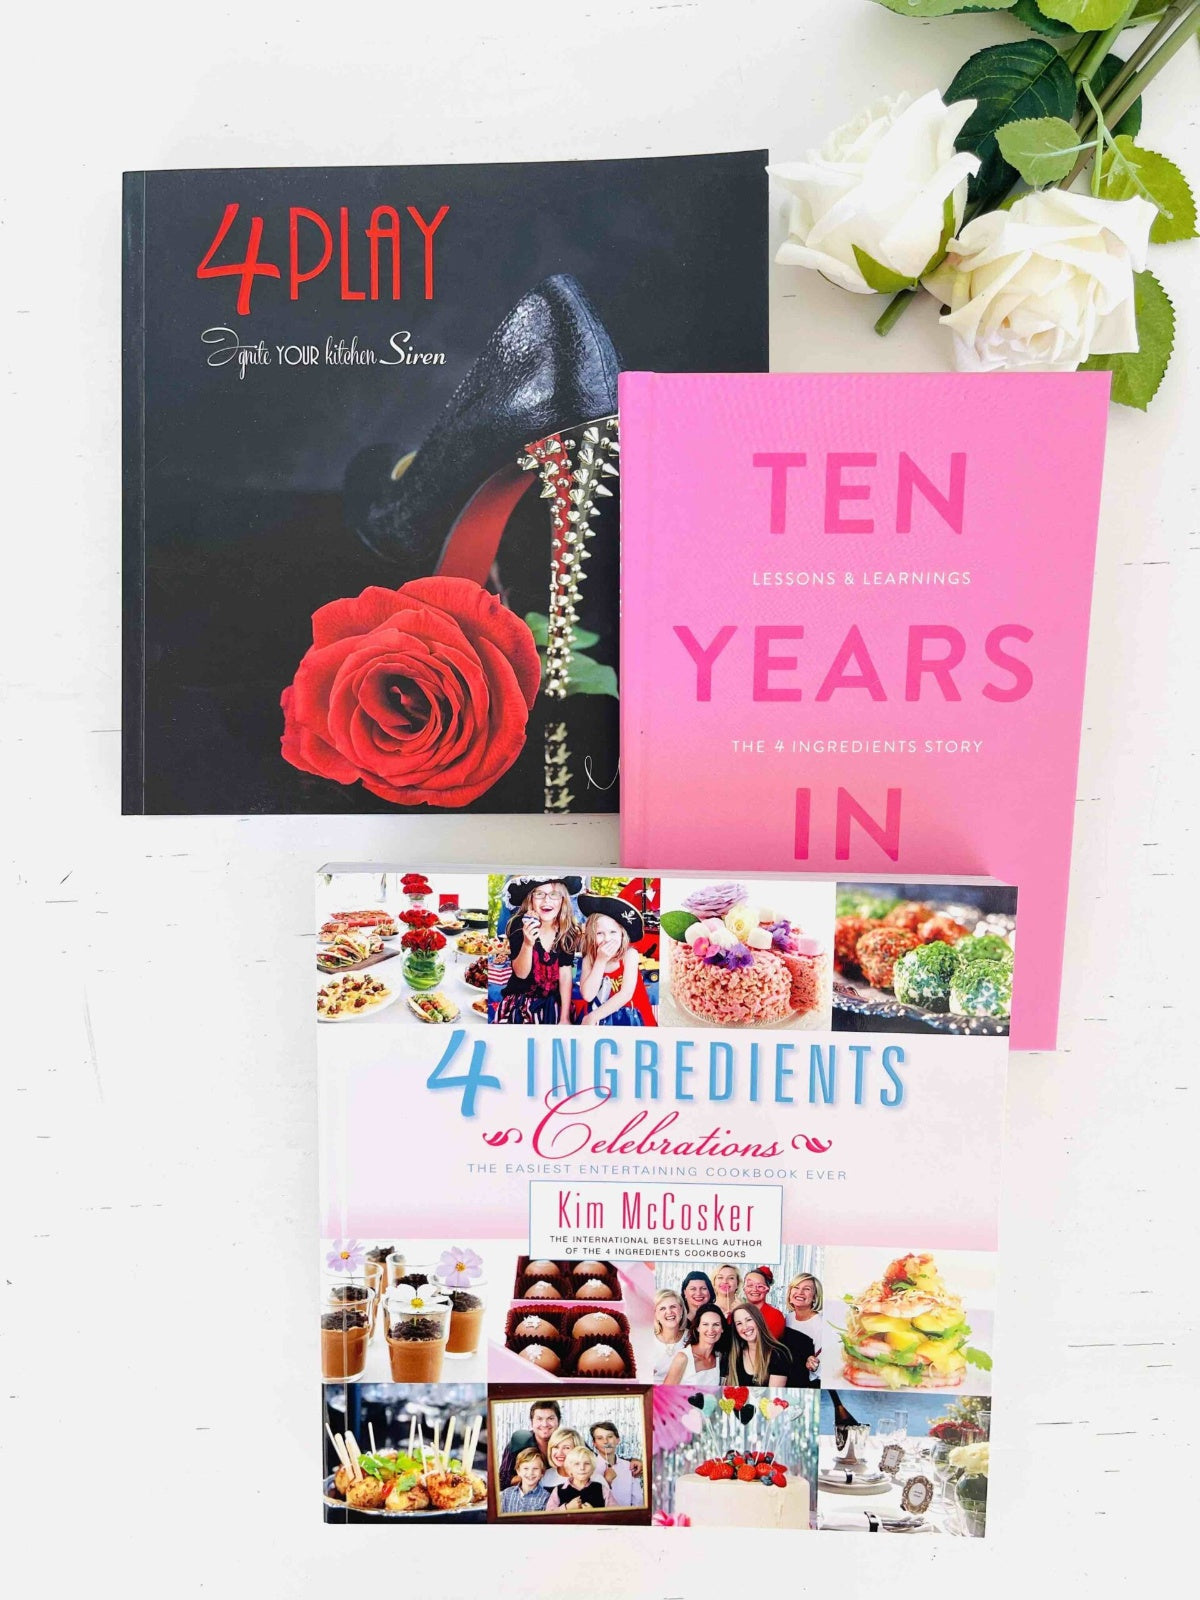 4 Play + 4 Ingredients Celebrations + a FREE COPY of Ten Years In